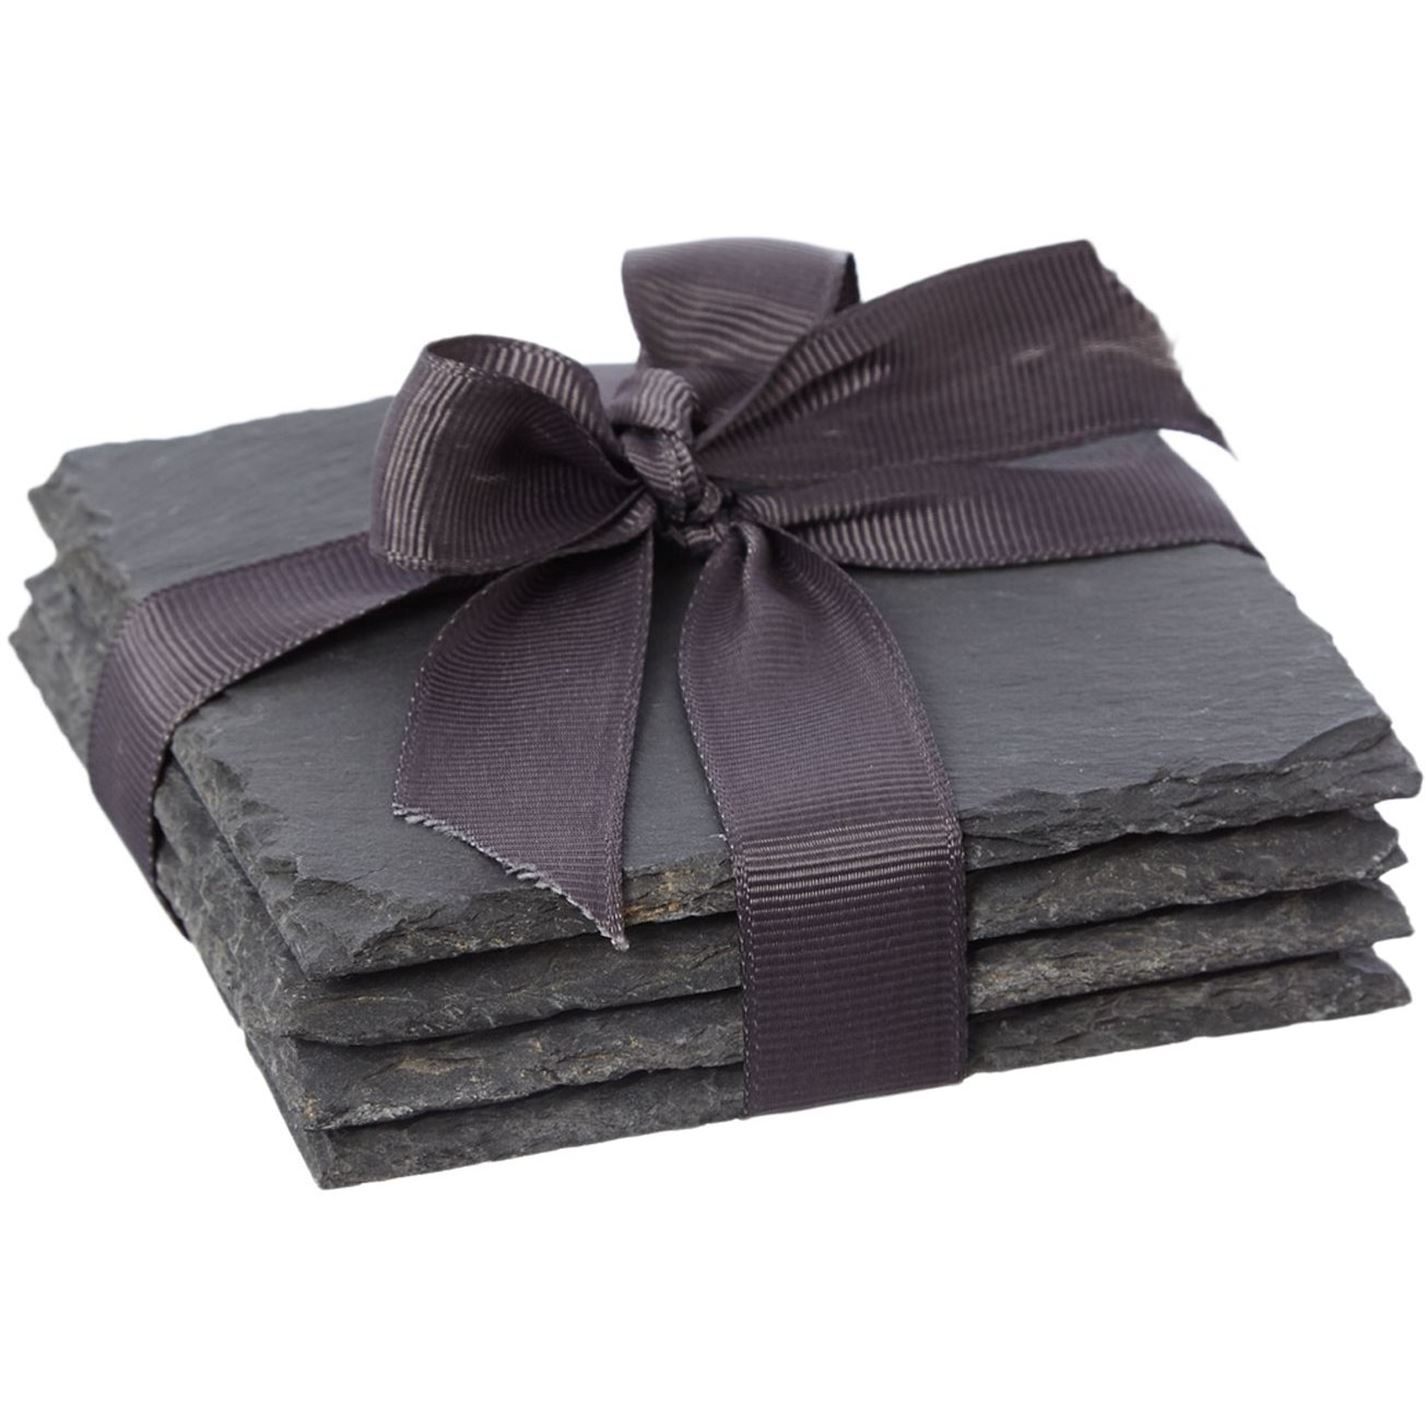 This set of 4 slate coasters are perfect for adding an organic and slightly...